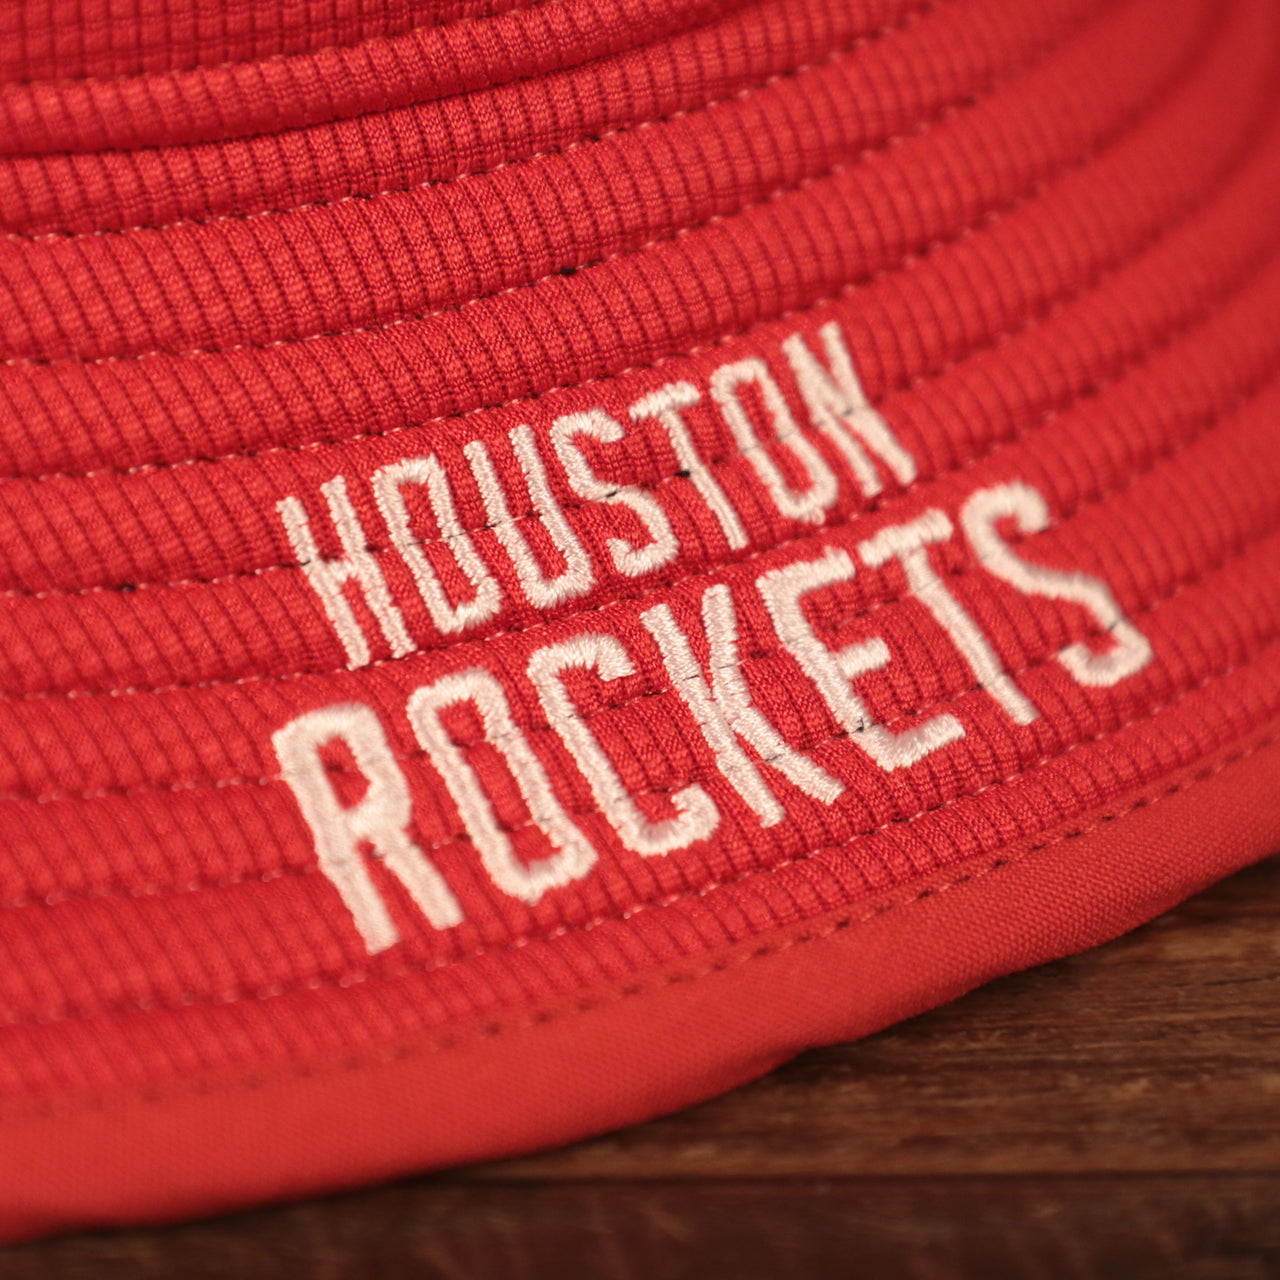 A closeup of the white Houston Rockets patch on the red Houston Rockets bucket hat by New Era.